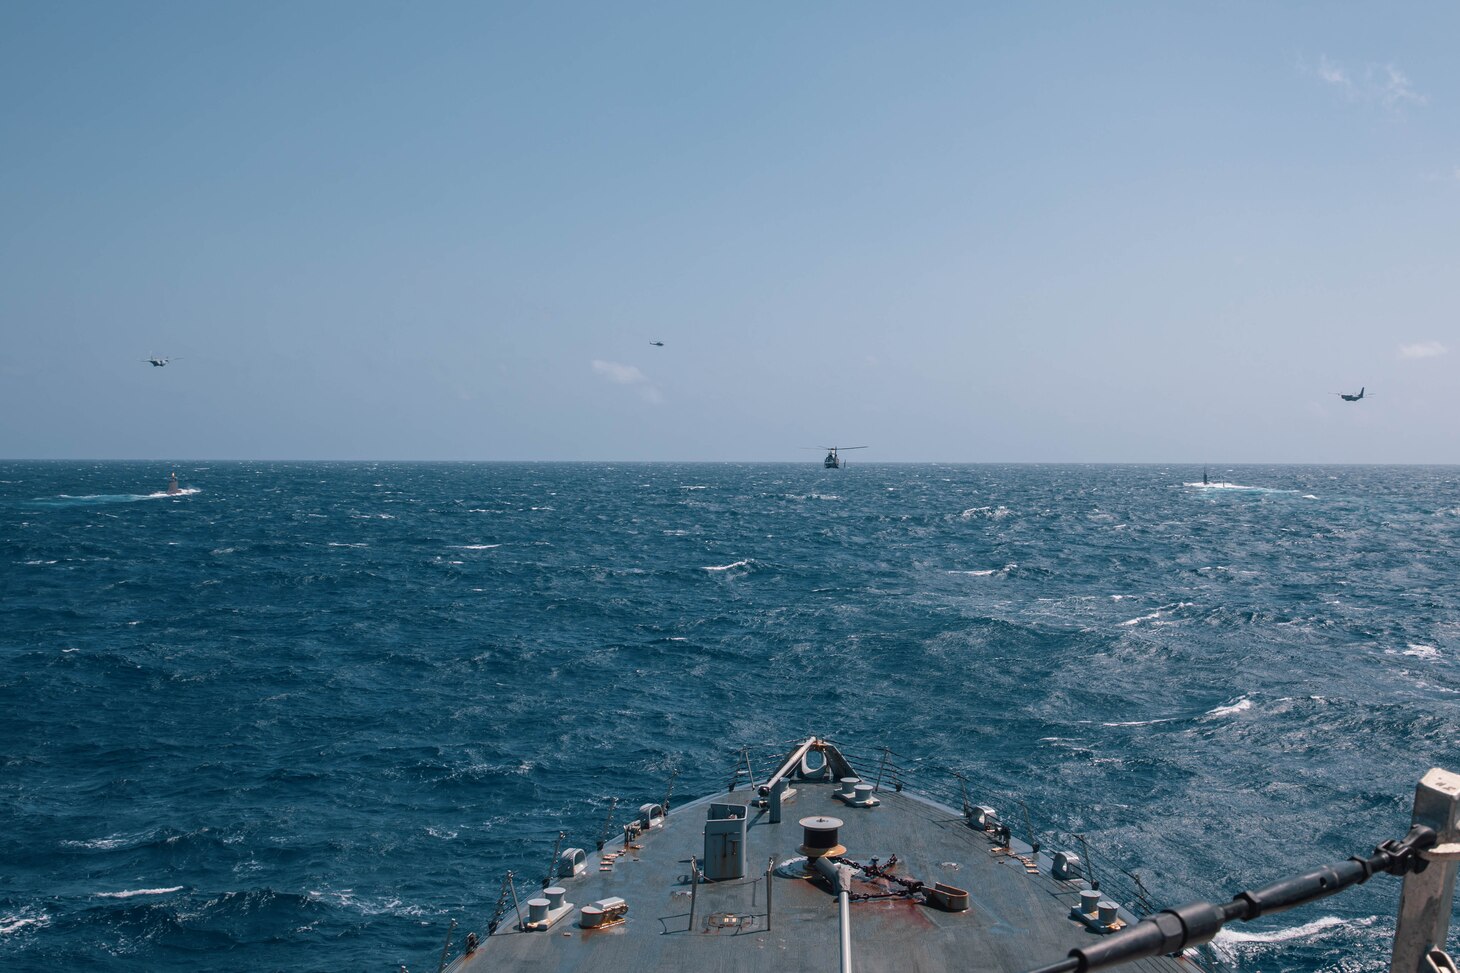 The Freedom-variant littoral combat ship USS Billings (LCS 15) sails in formation with the Virginia-class fast attack submarine USS Minnesota (SSN 783), the Colombian navy submarine ARC Pijao (SSK-28), Colombian navy Dauphin helicopters, and Colombian navy maritime patrol aircraft during a bilateral anti-submarine warfare exercise, Feb. 27, 2022. Billings is deployed to the U.S. 4th Fleet area of operations to support Joint Interagency Task Force South’s mission, which includes counter-illicit drug trafficking missions in the Caribbean and Eastern Pacific. (U.S. Navy photo by Mass Communication Specialist 3rd Class Aaron Lau/Released)